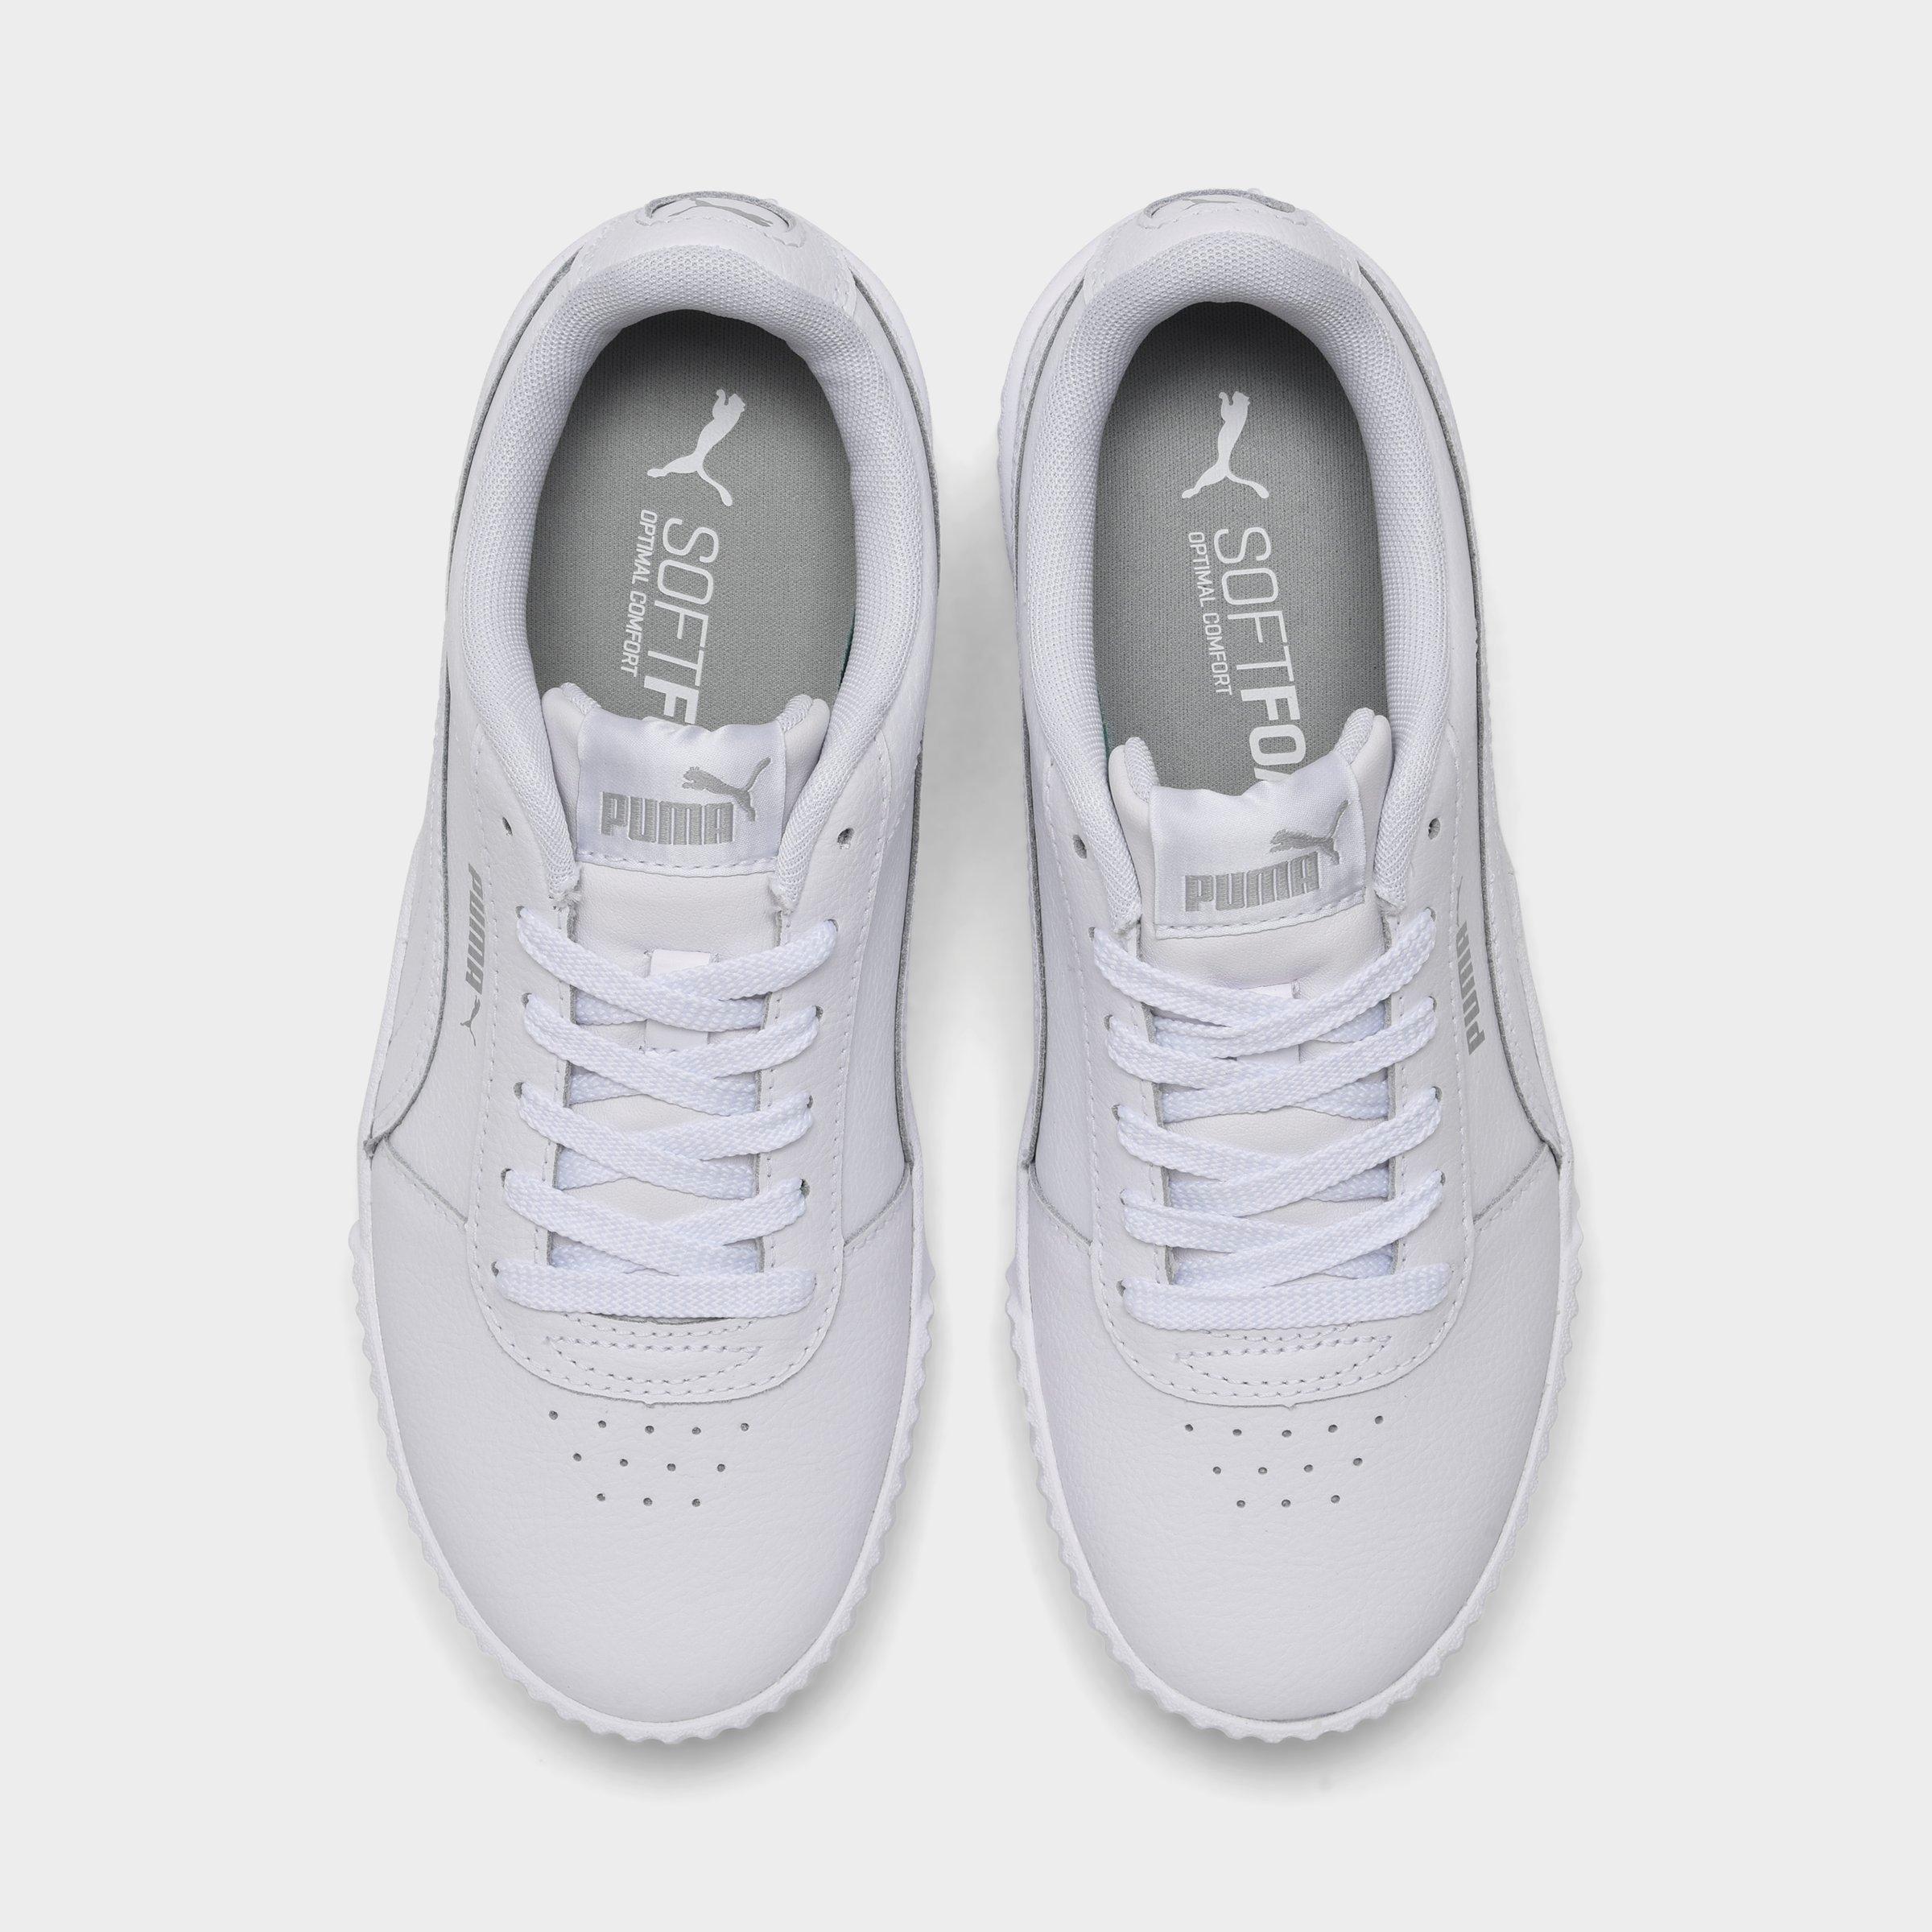 women's carina leather casual sneakers from finish line